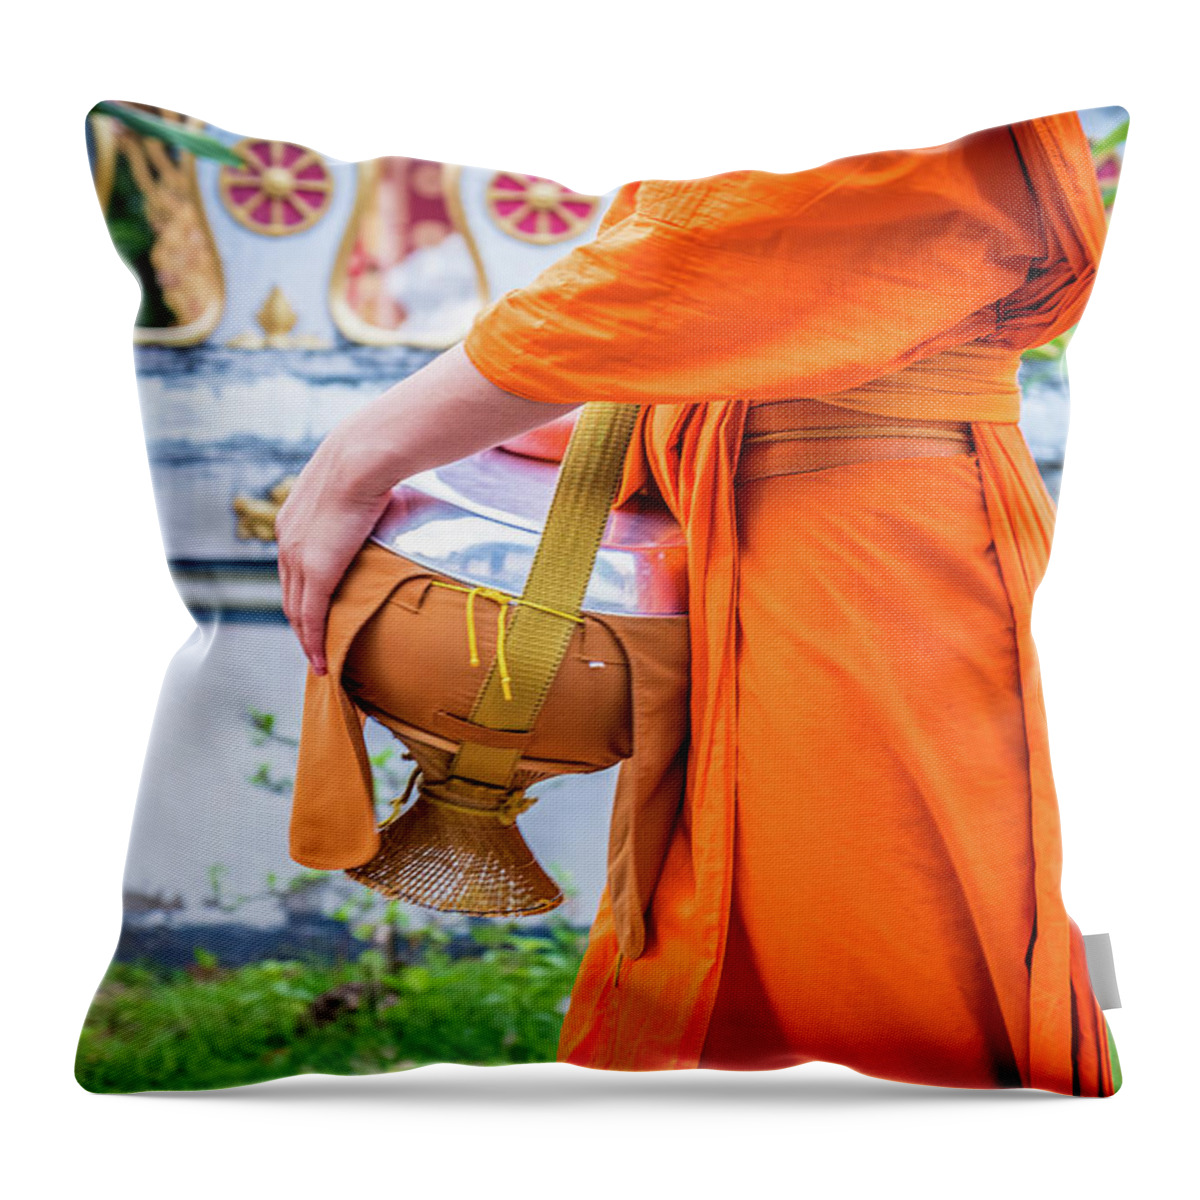 Laos Photography Throw Pillow featuring the photograph A Buddhist's Life by Marla Brown